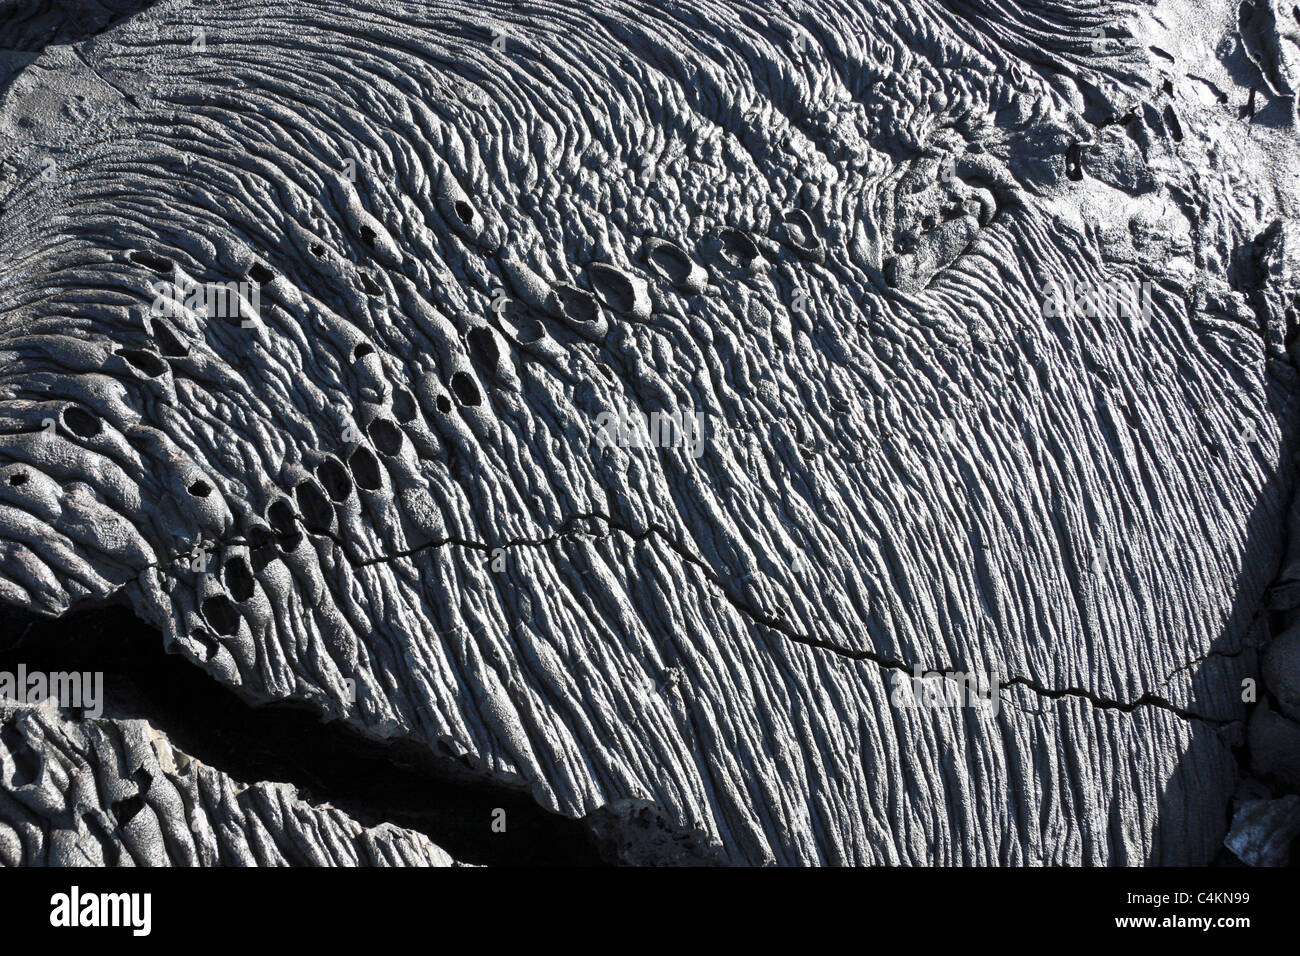 The Pahoehoe lava field on Santiago island, Galapagos, conceals stunning lava formations. Cable-pattern or rope-pattern flow. Stock Photo